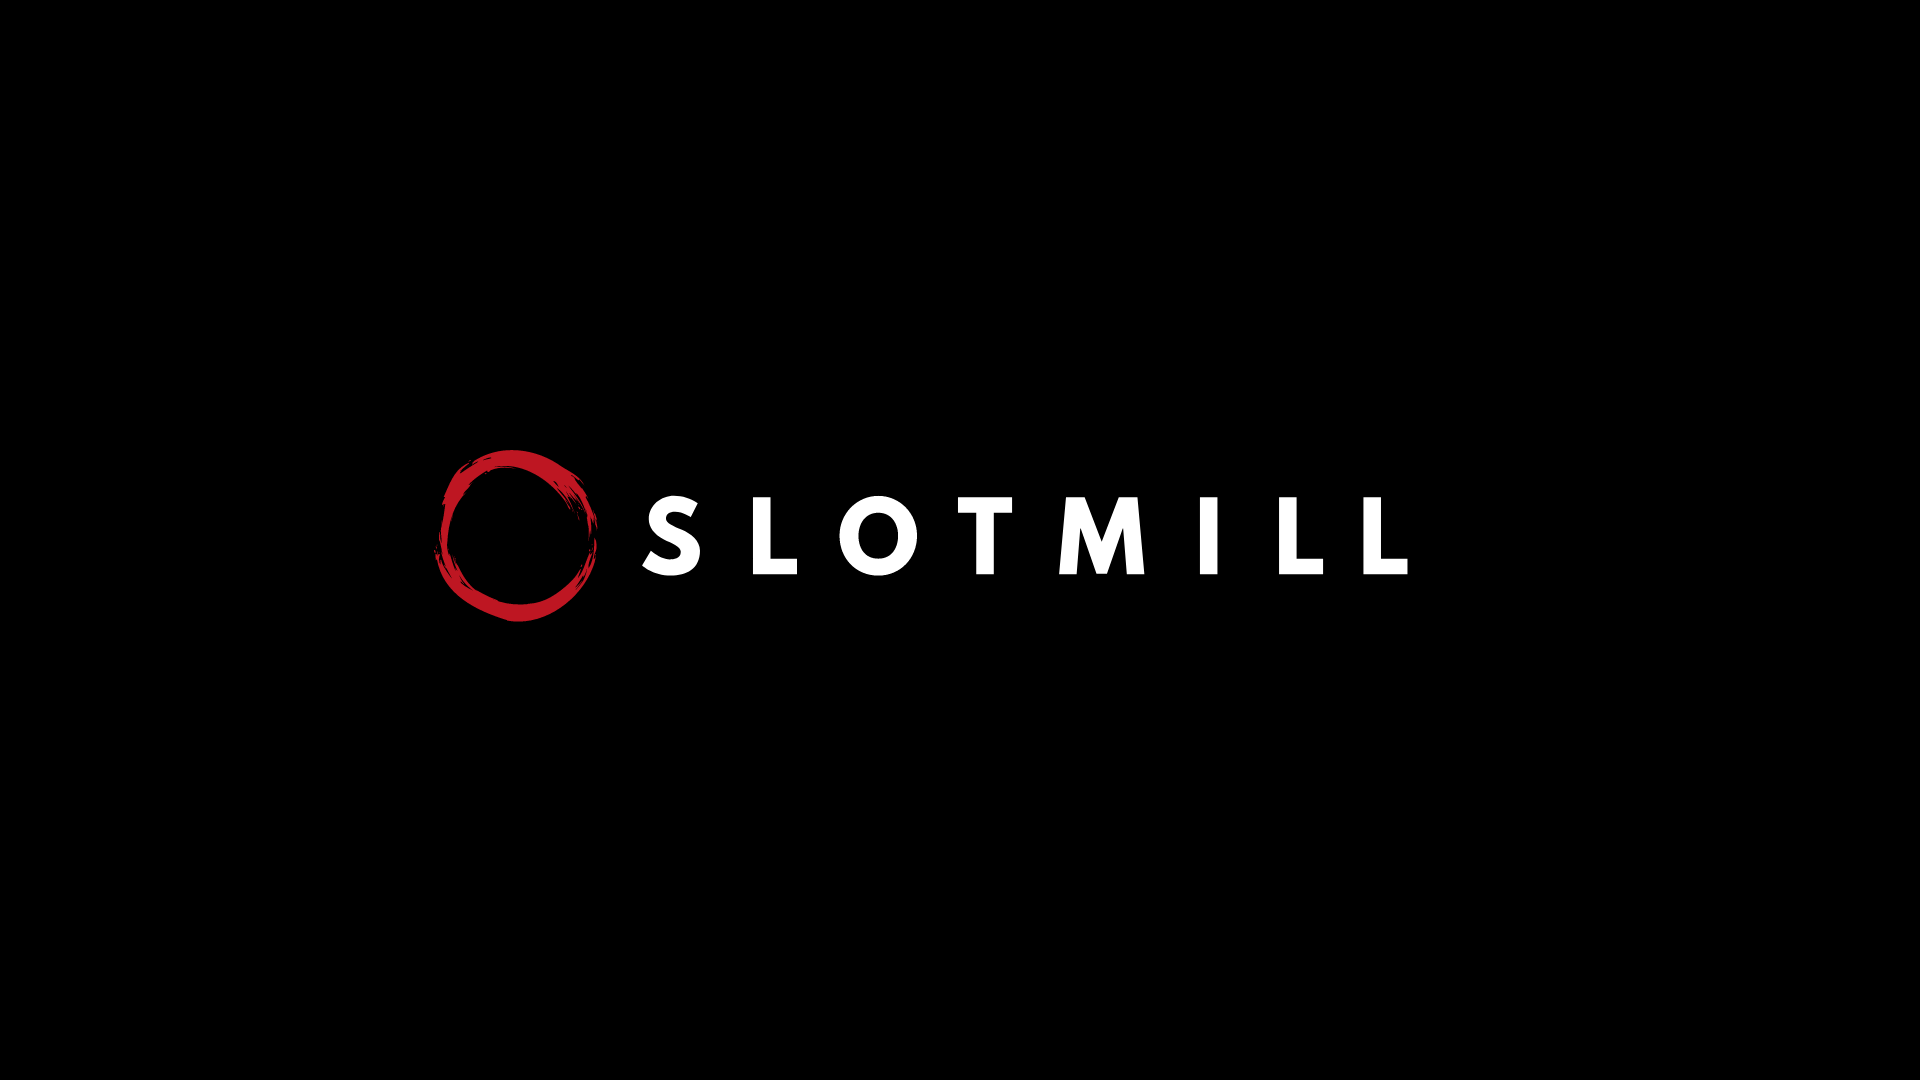 Slotmill certified for Estonia and Latvia